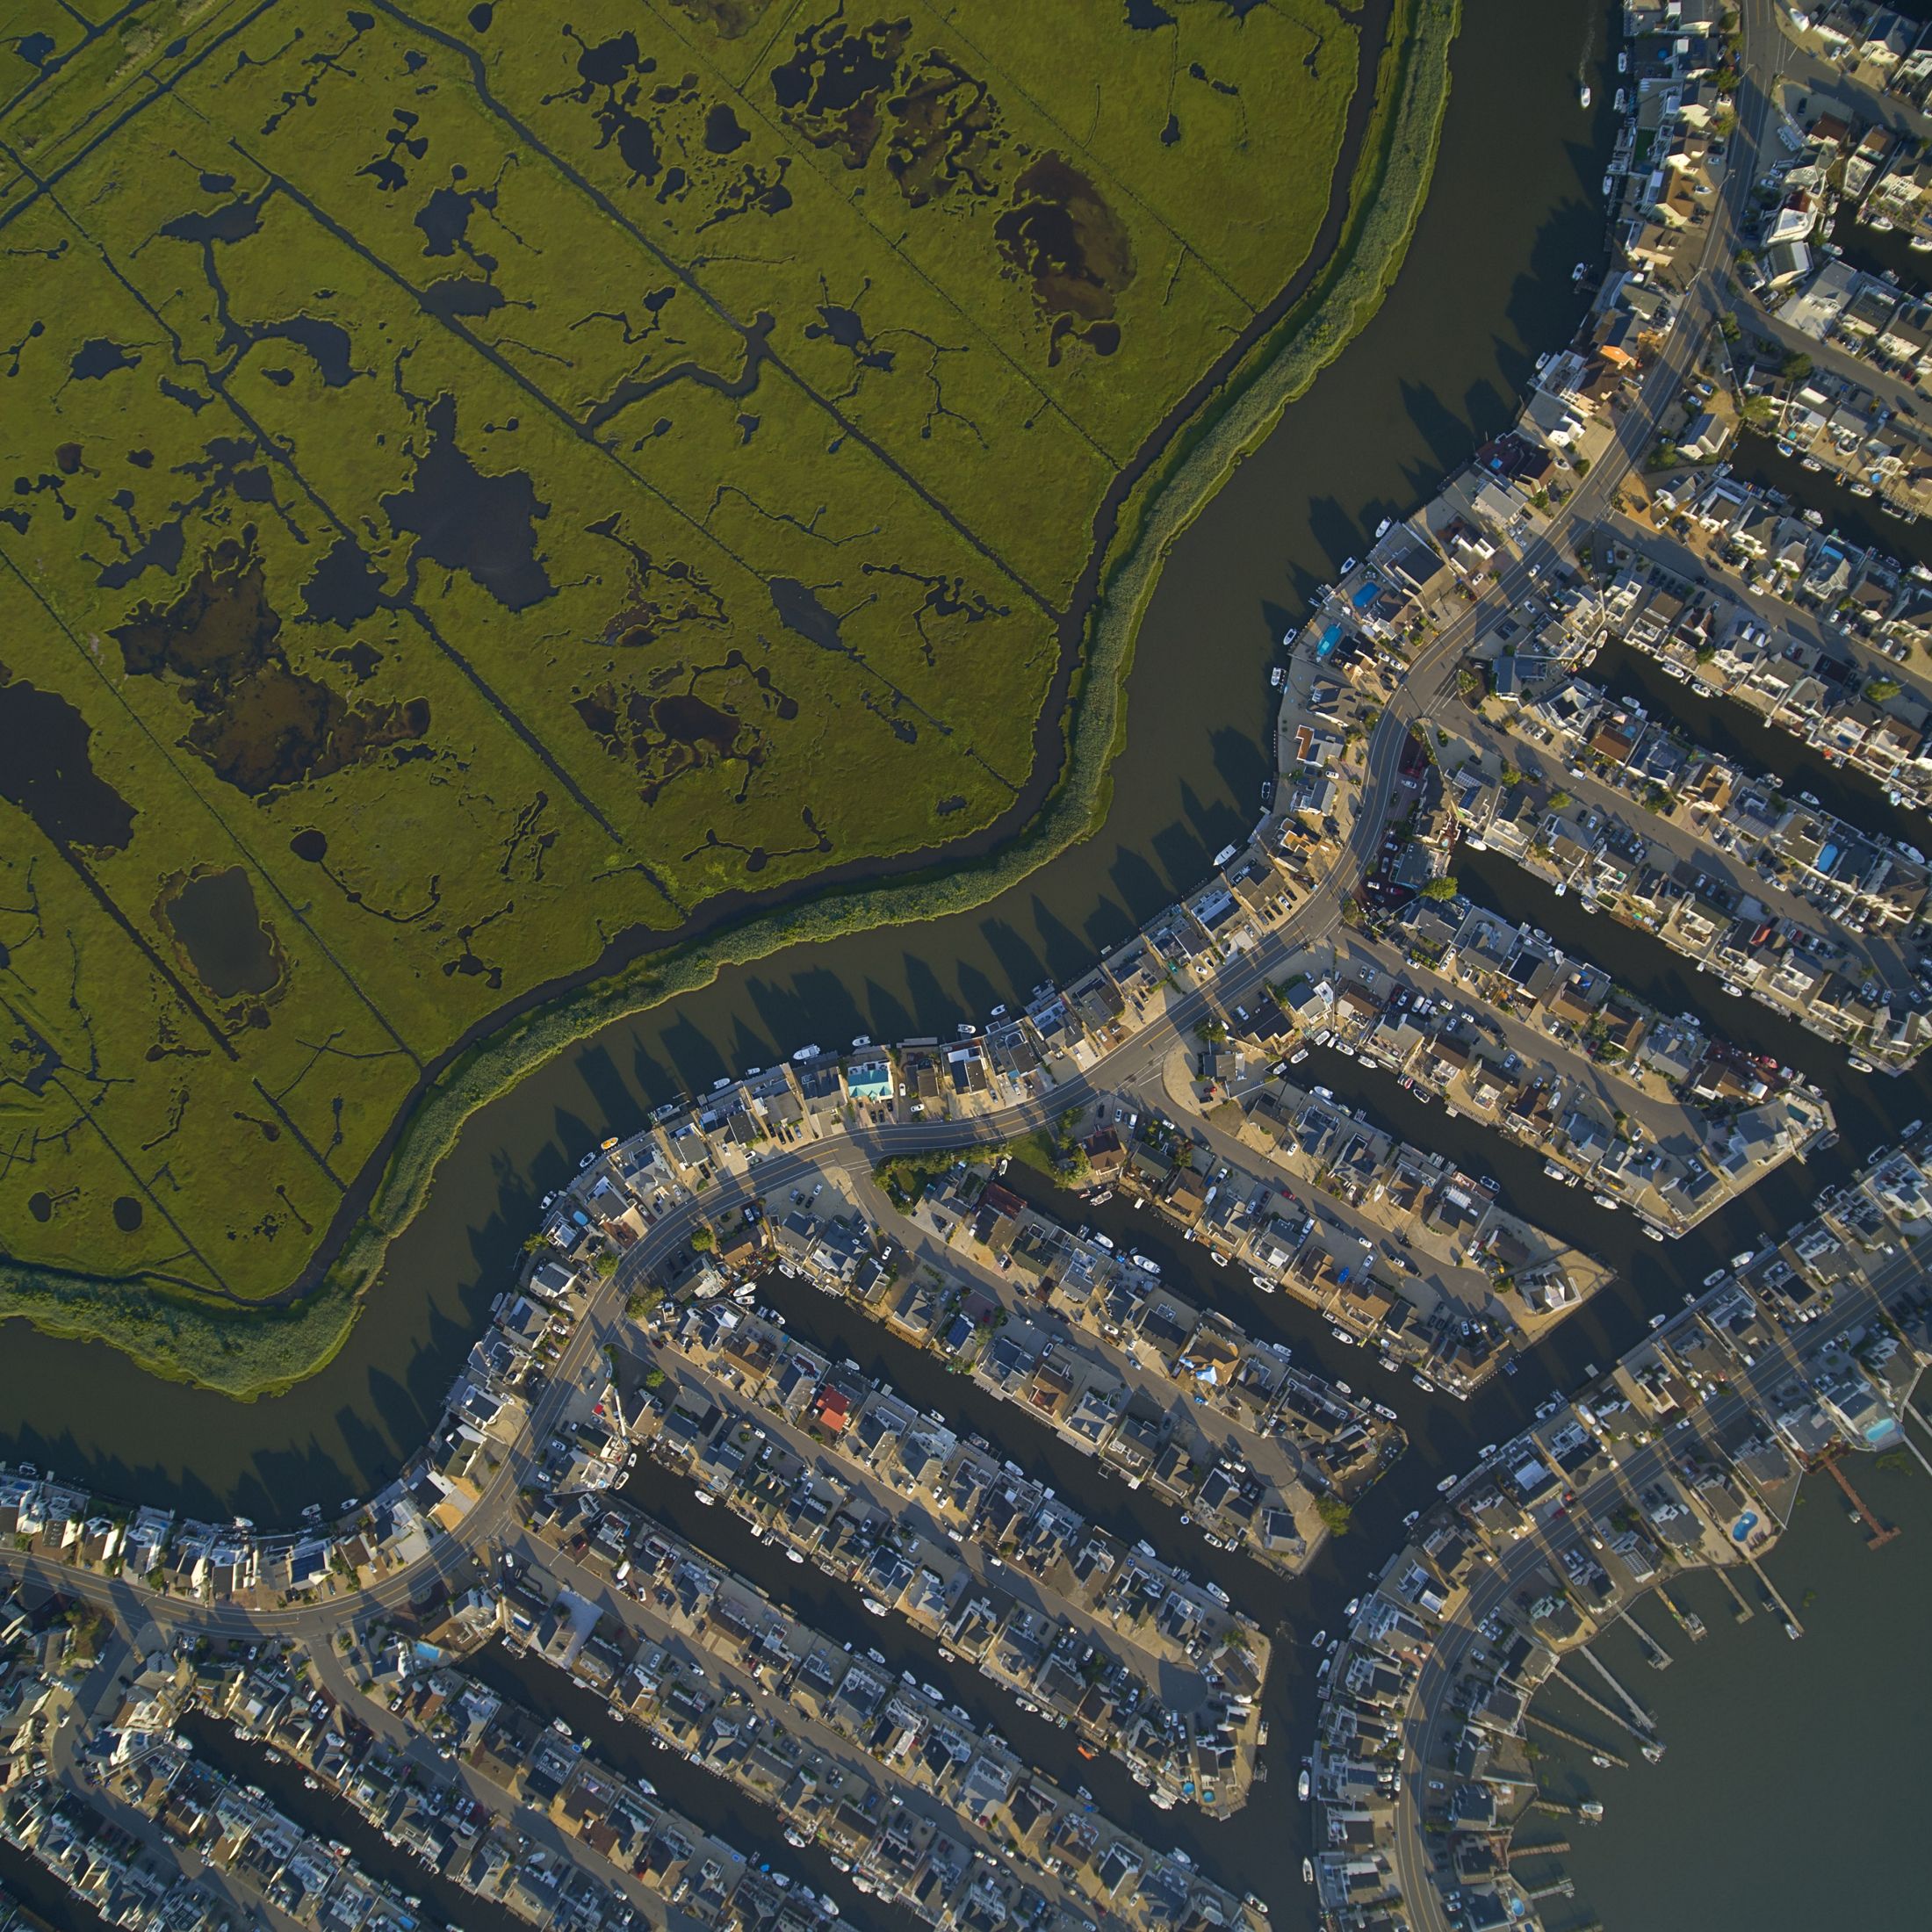 Canal seen from above: On one side dozens of houses sit right against the water, on the other green marsh grasses grow